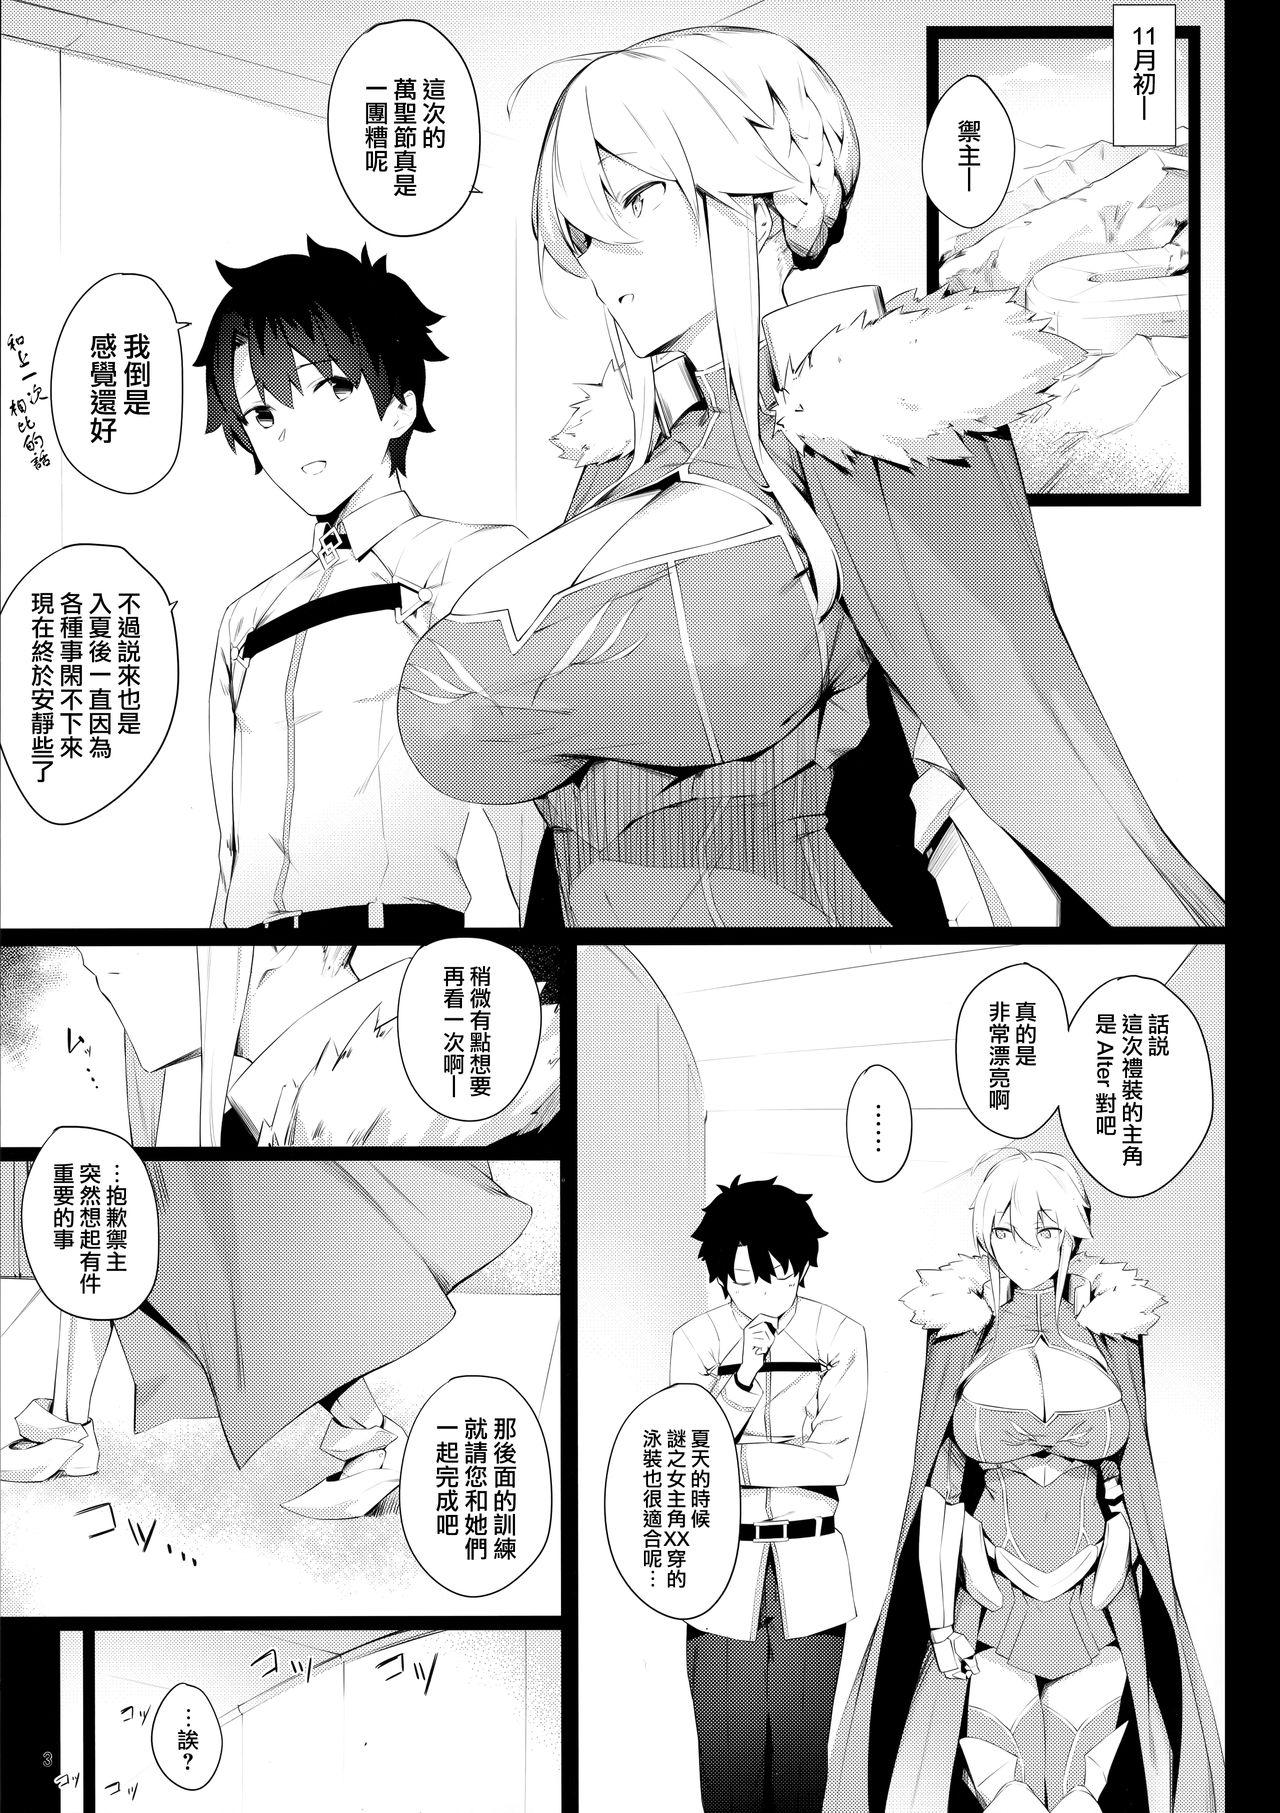 Cdzinha Sultry Altria - Fate grand order Old Vs Young - Page 3